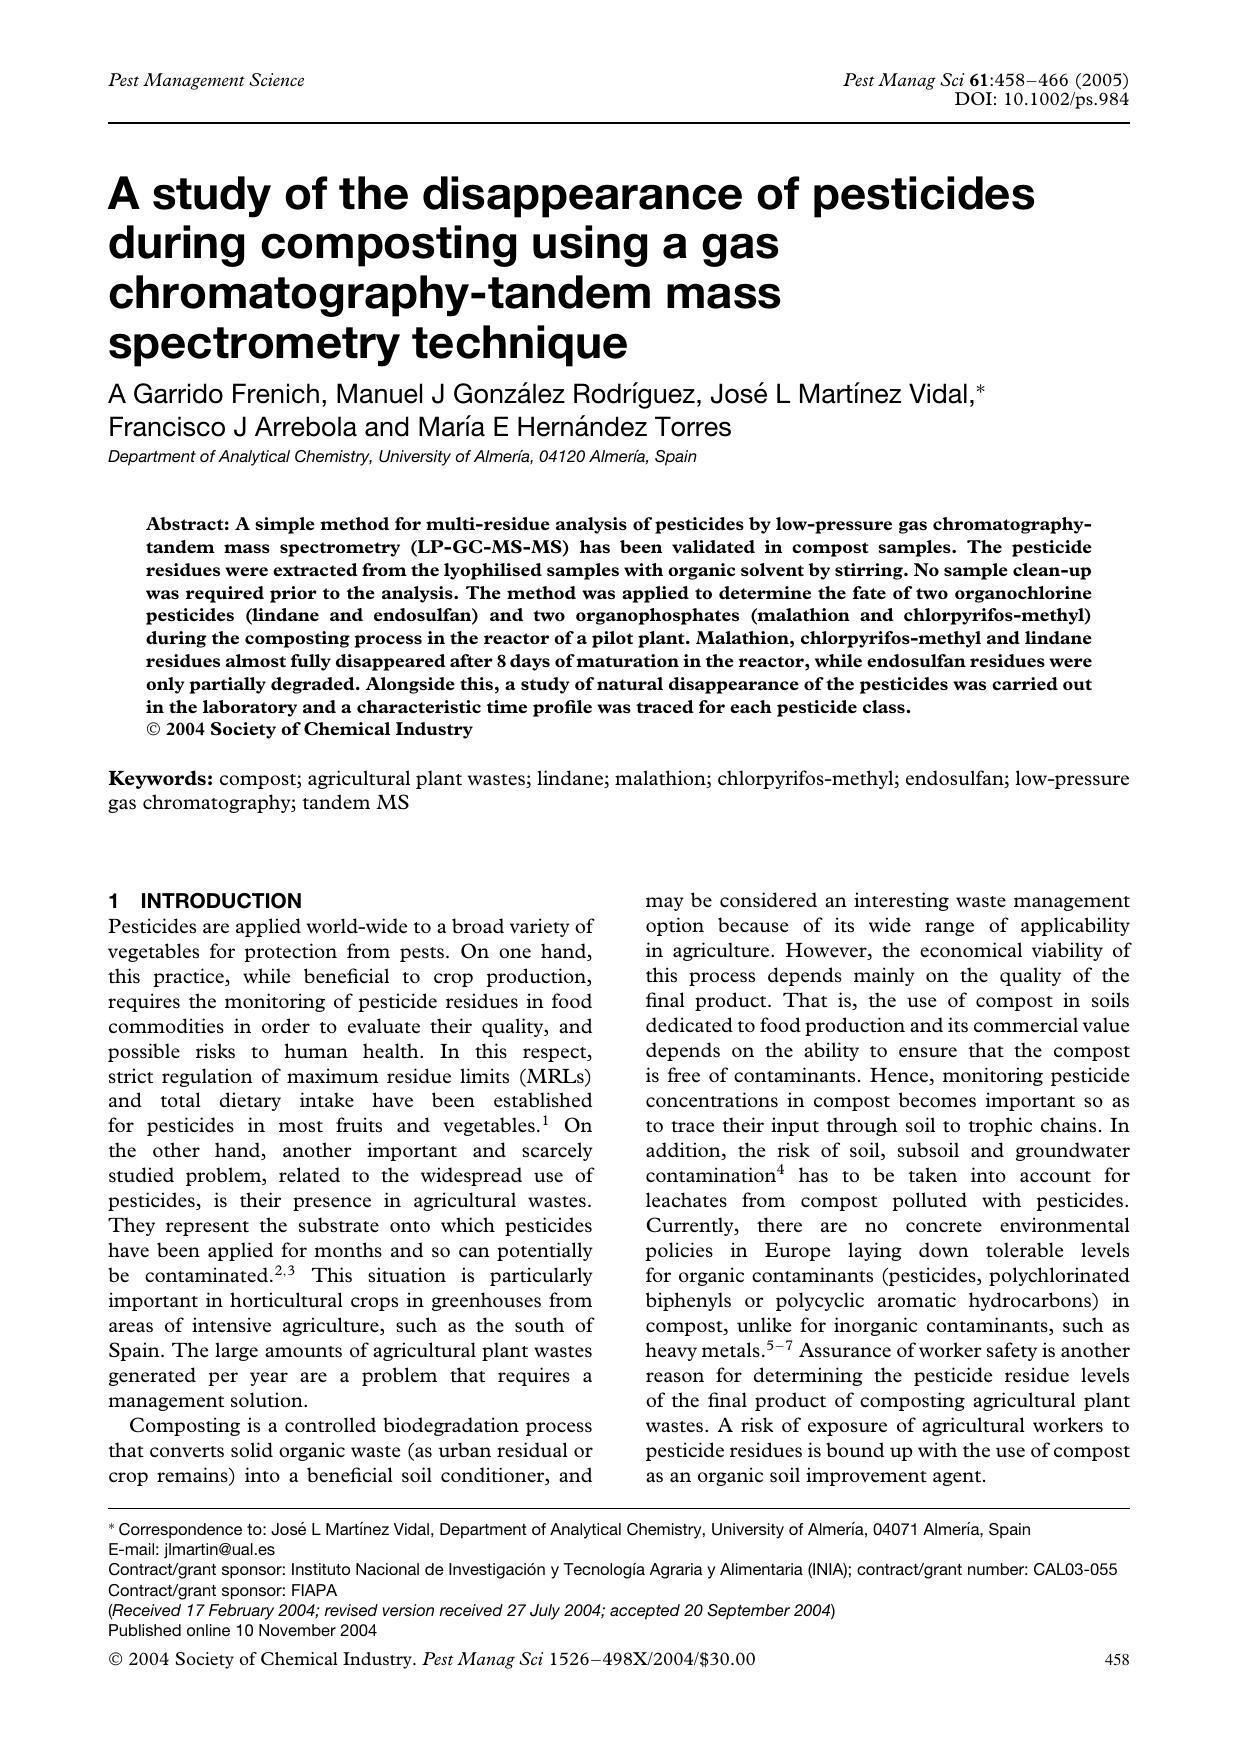 A study of the disappearance of pesticides during composting using a gas chromatography-tandem mass spectrometry technique by Unknown